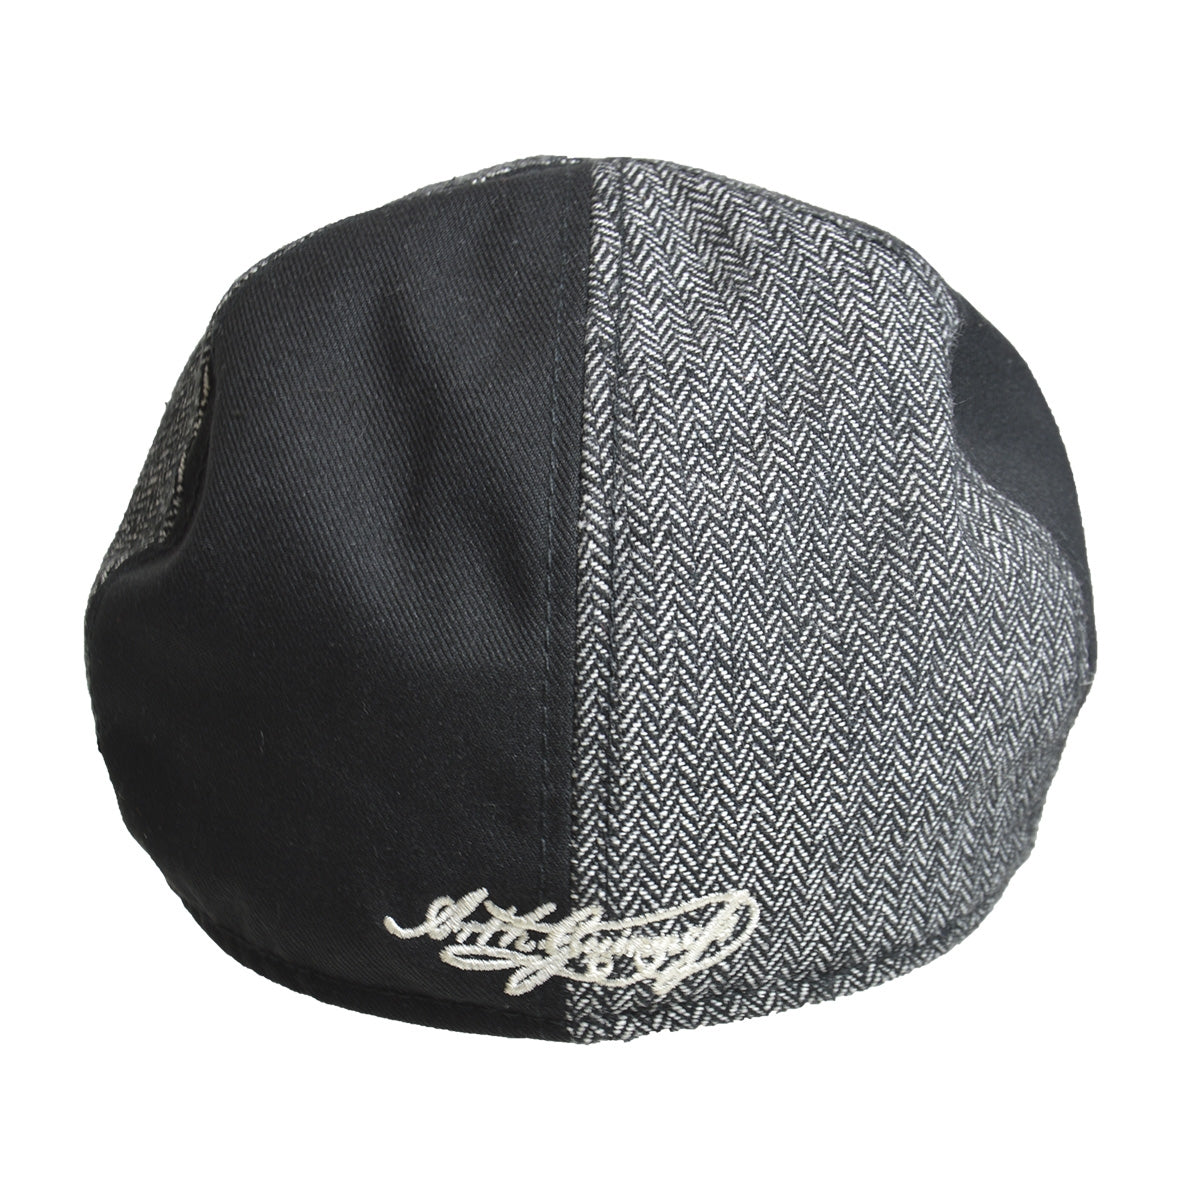 A Guinness Paneled Ivy Cap embroidered with the word herringbone.